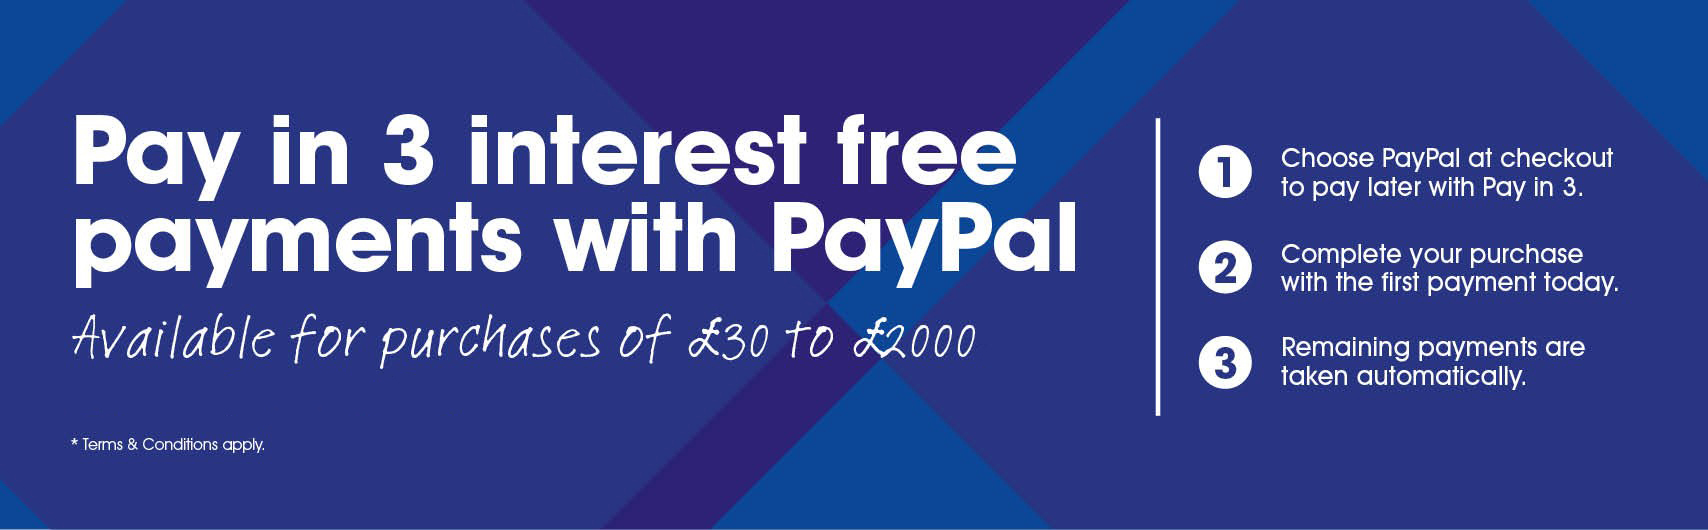 PayPal Pay In 3